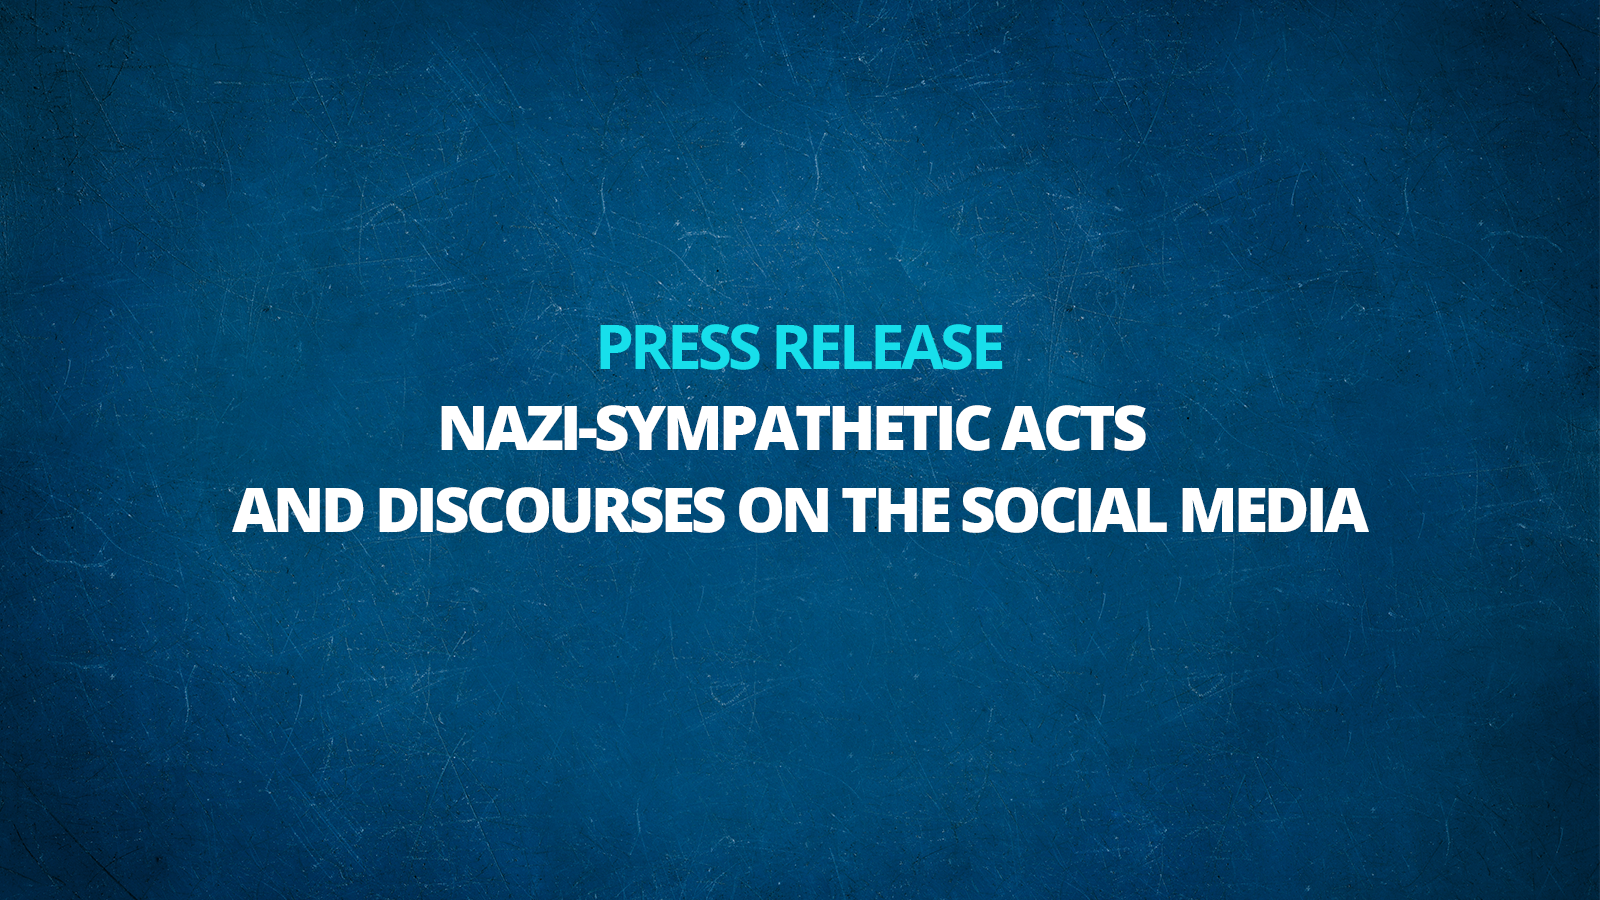 Press Release on Nazi-Sympathetic Acts and Discourses on the Social Media